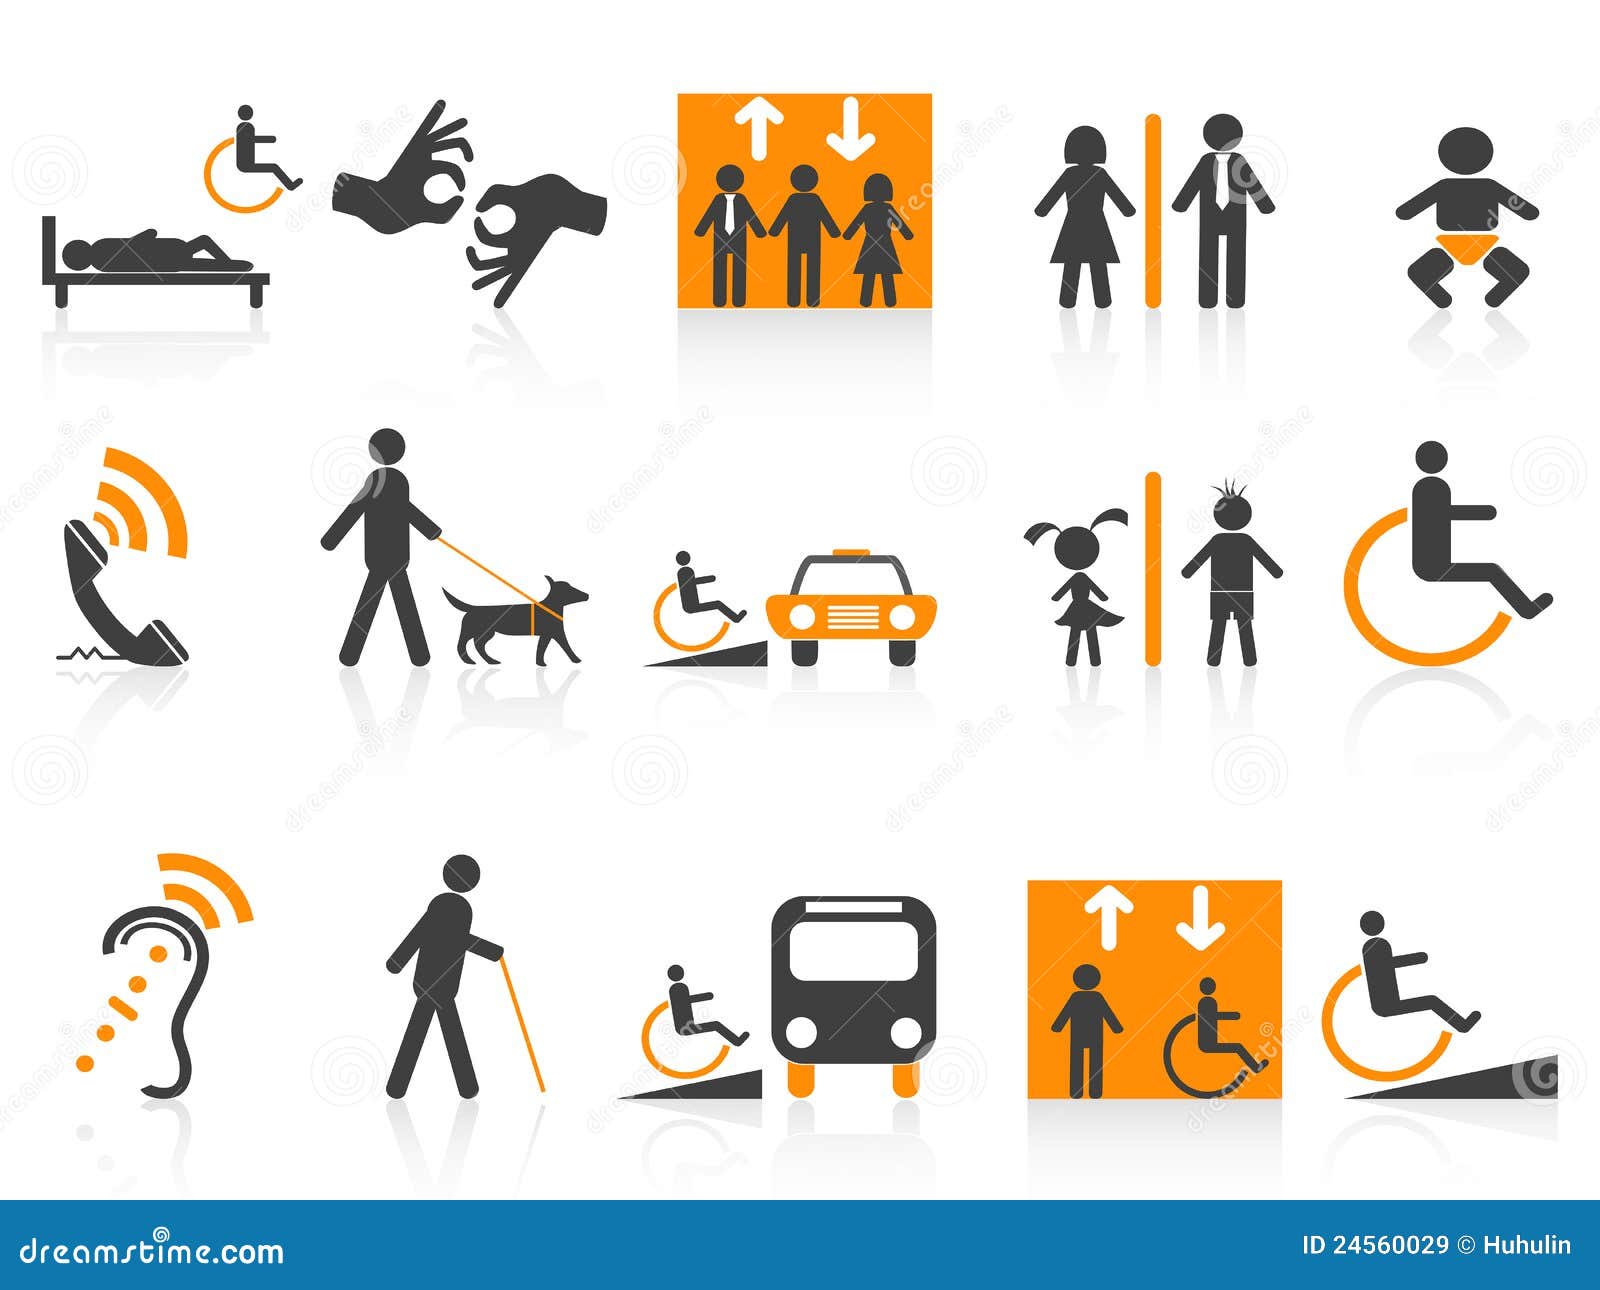 accessibility icons set